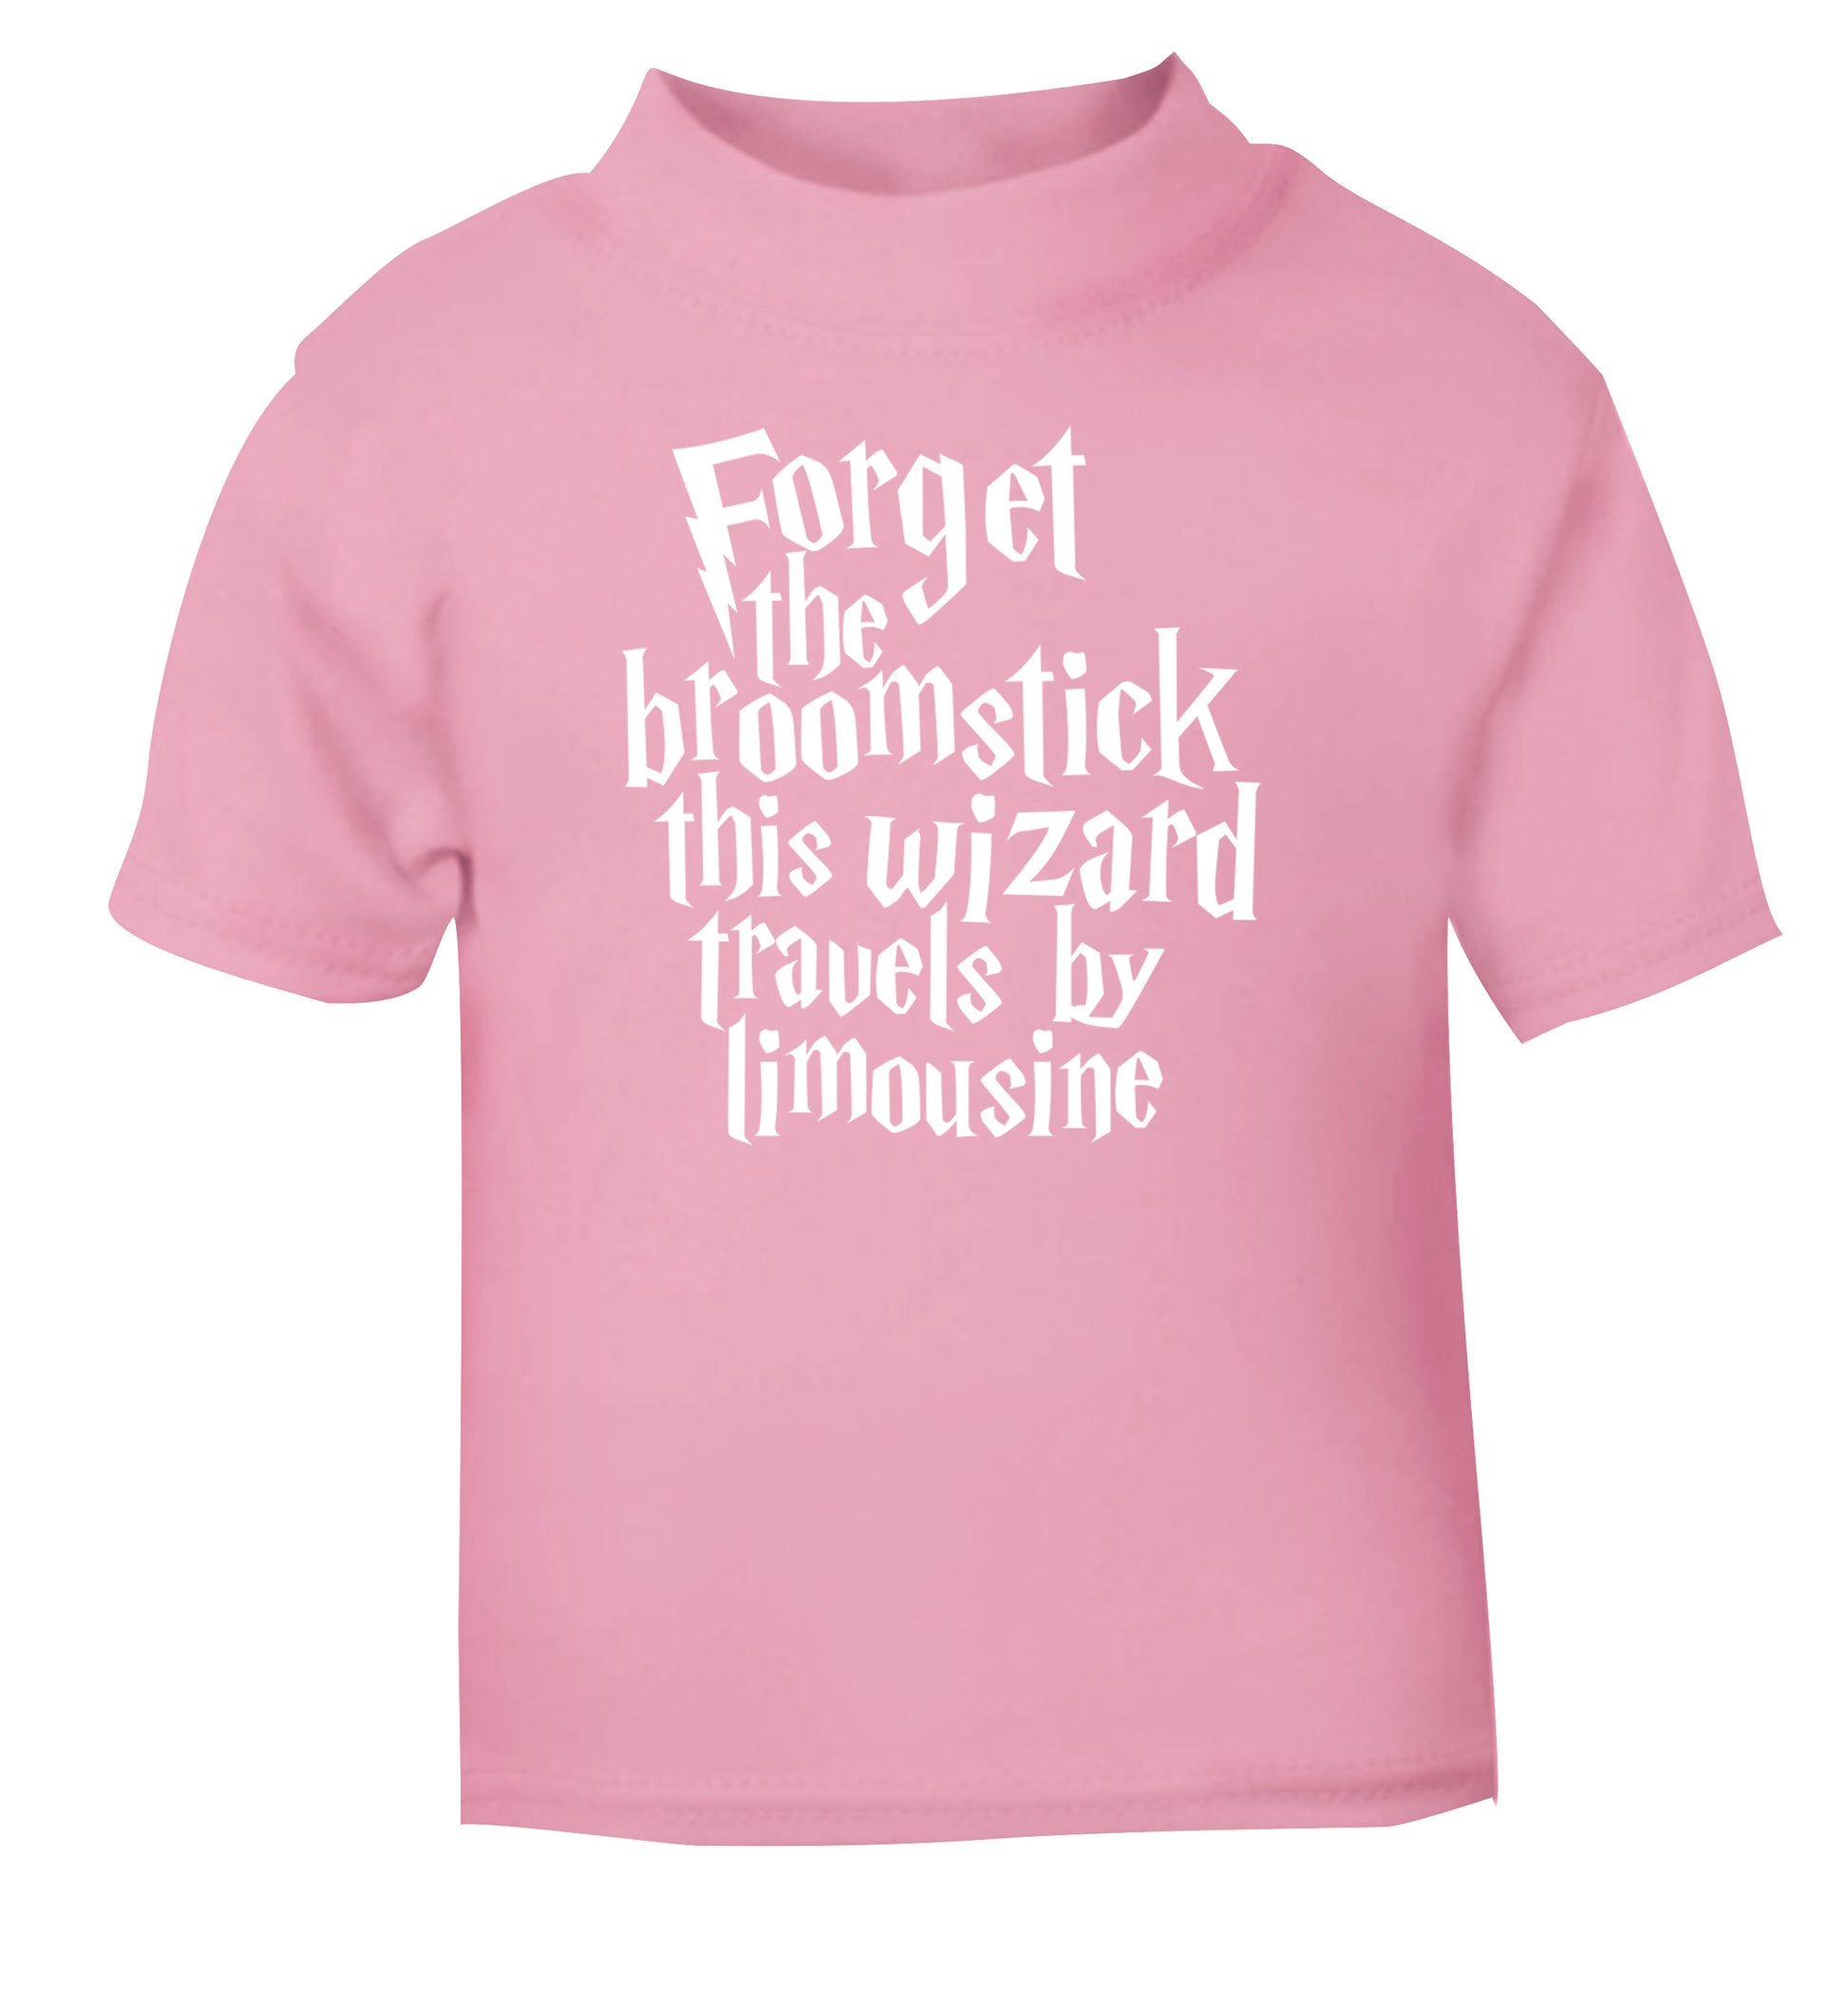 Forget the broomstick this wizard travels by limousine light pink Baby Toddler Tshirt 2 Years